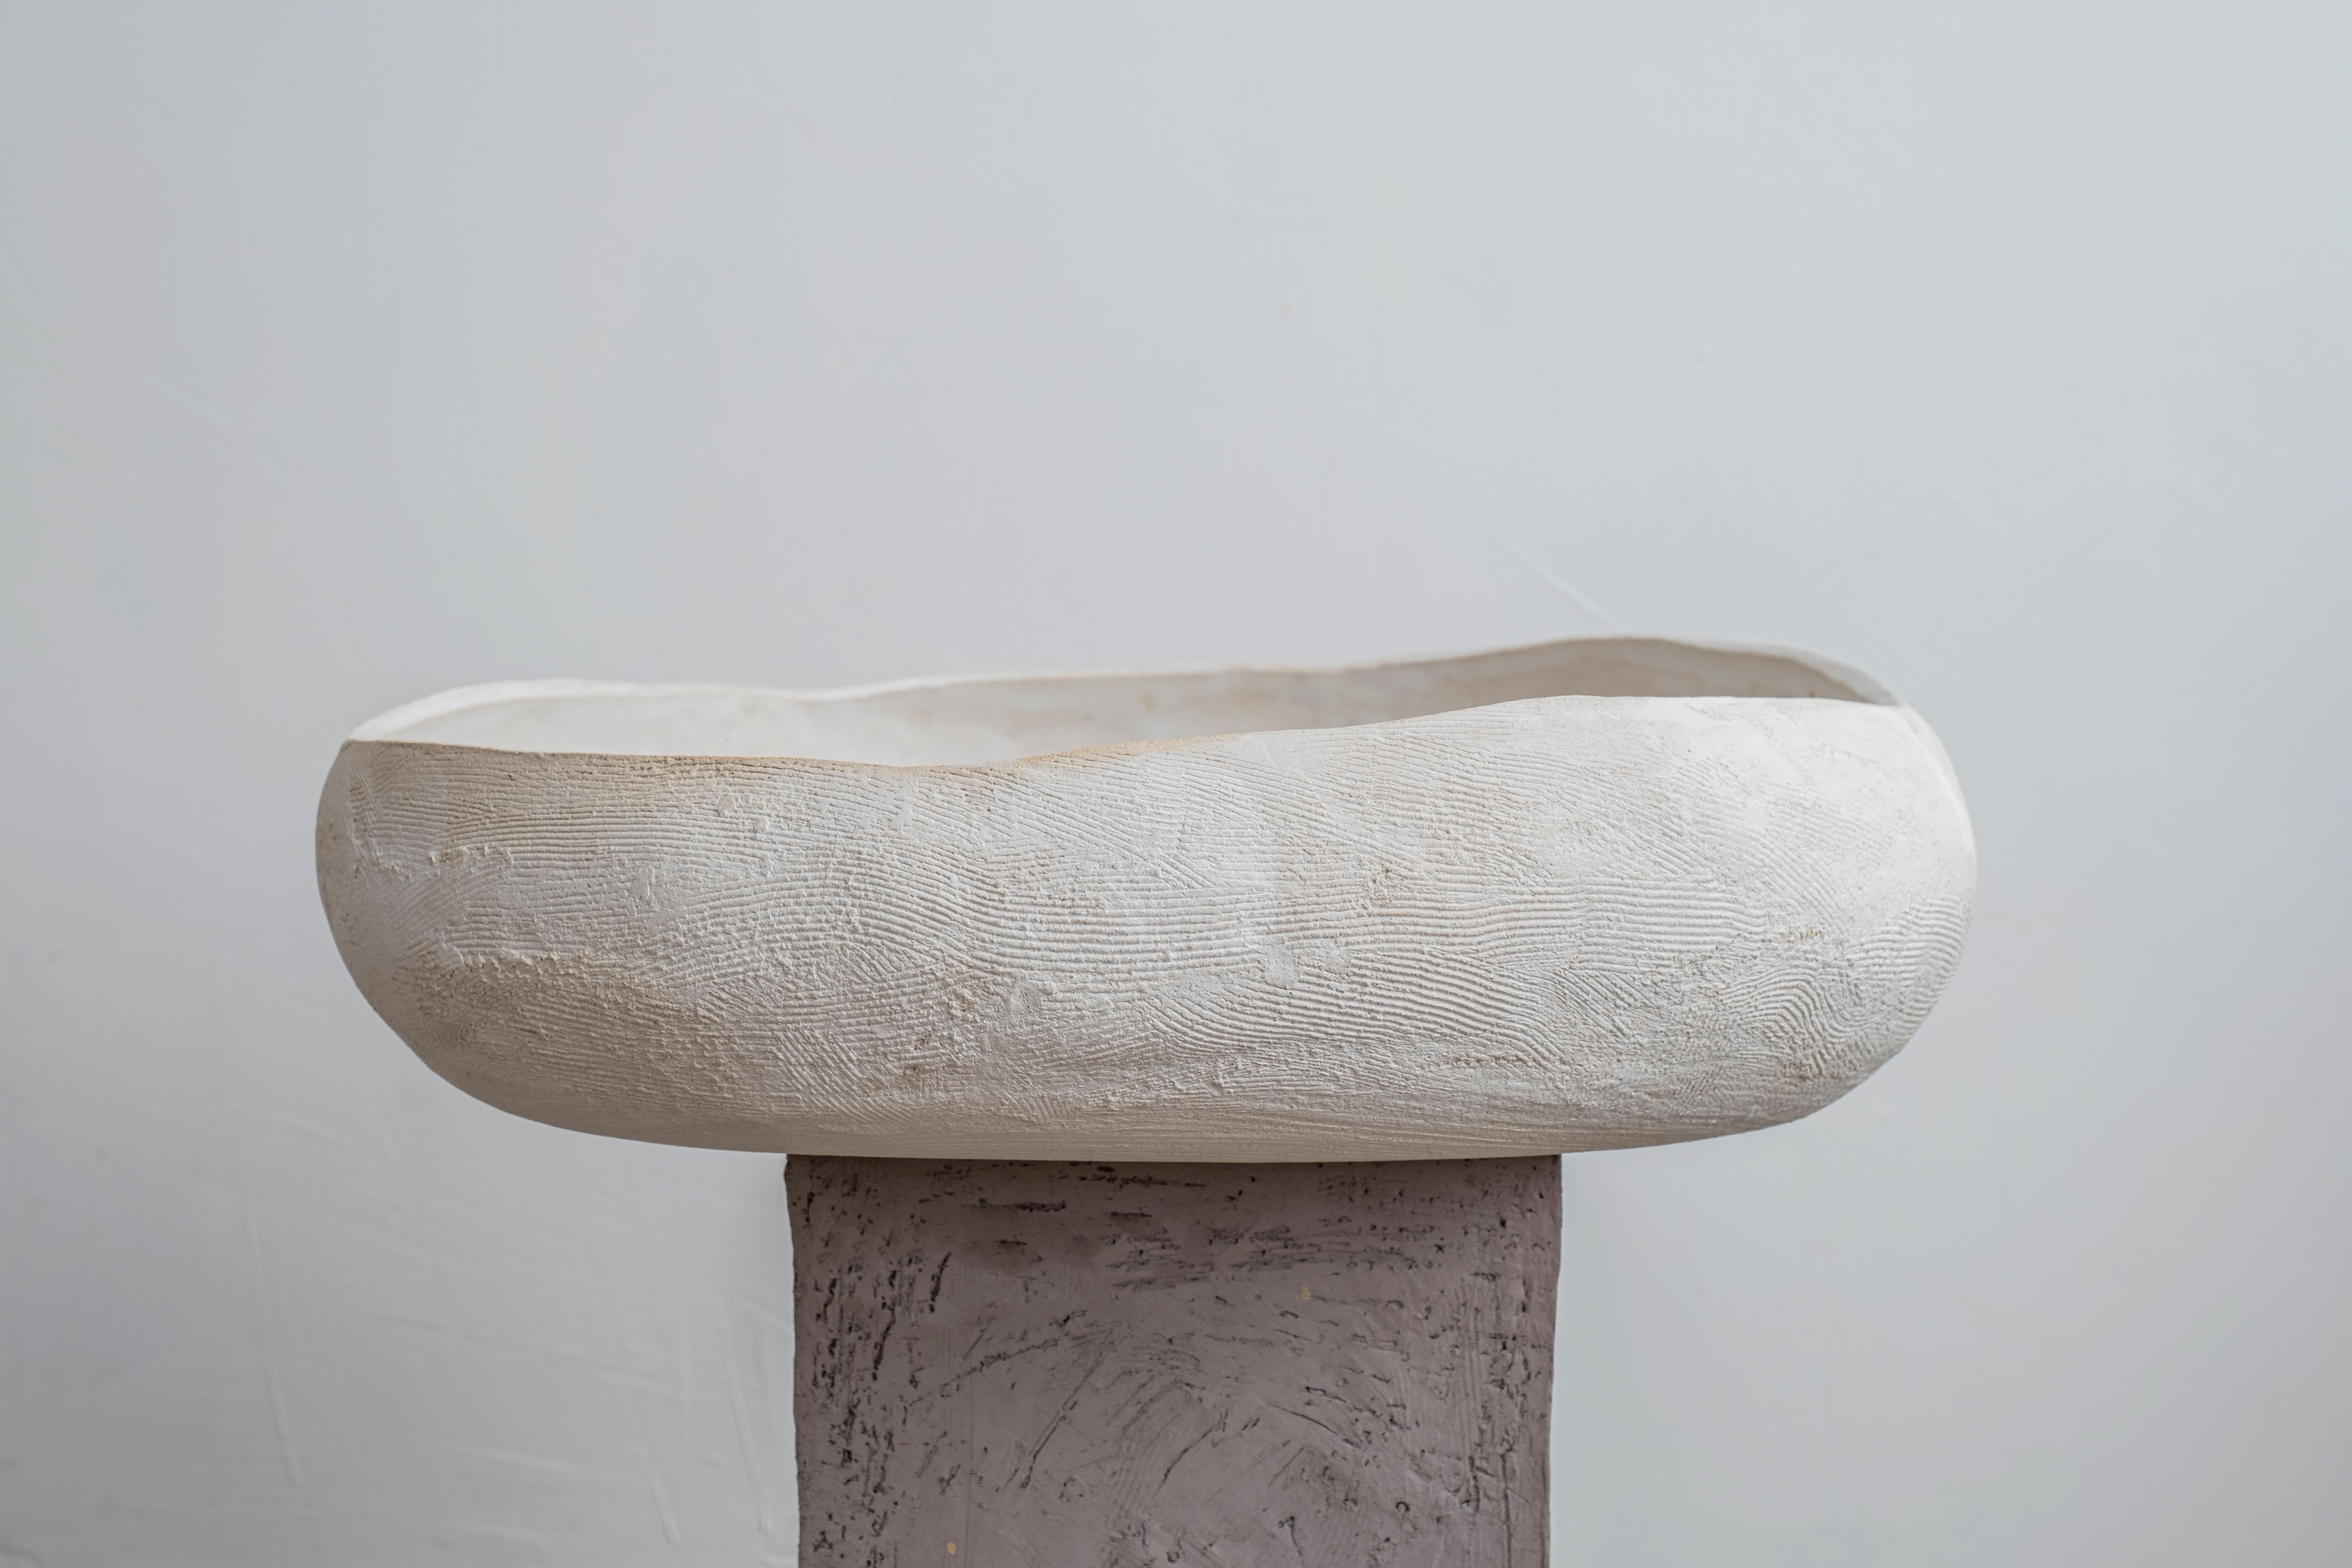 Alcove #7 sculpture by Margaux Leycuras.
One of a kind, signed and numbered.
Dimensions: D 46 x H 41 cm.
Material: sandy stoneware with a porcelain slip finish and white glaze inside.

The piece is signed, numbered and delivered with a